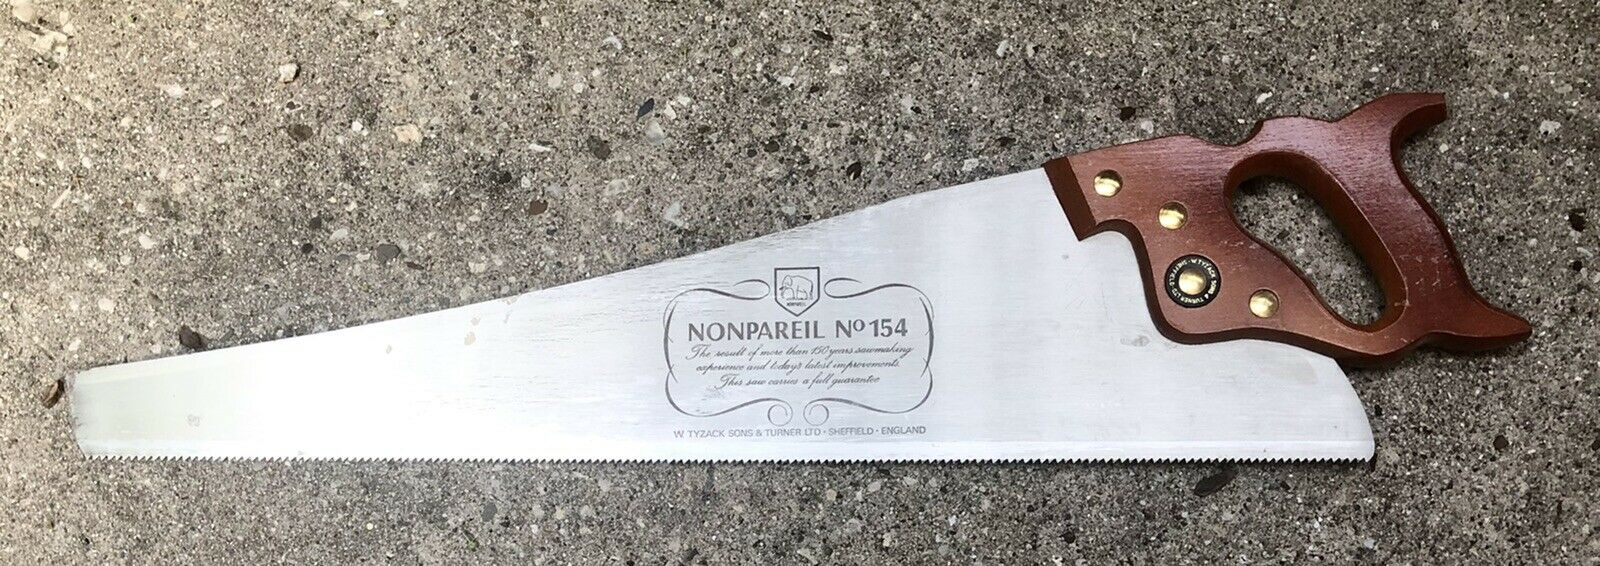 W. Tyzack Sons & Turner No. 154 Nonpareil Cross-cut Hand Saw 24" 8 Ppi Excellent